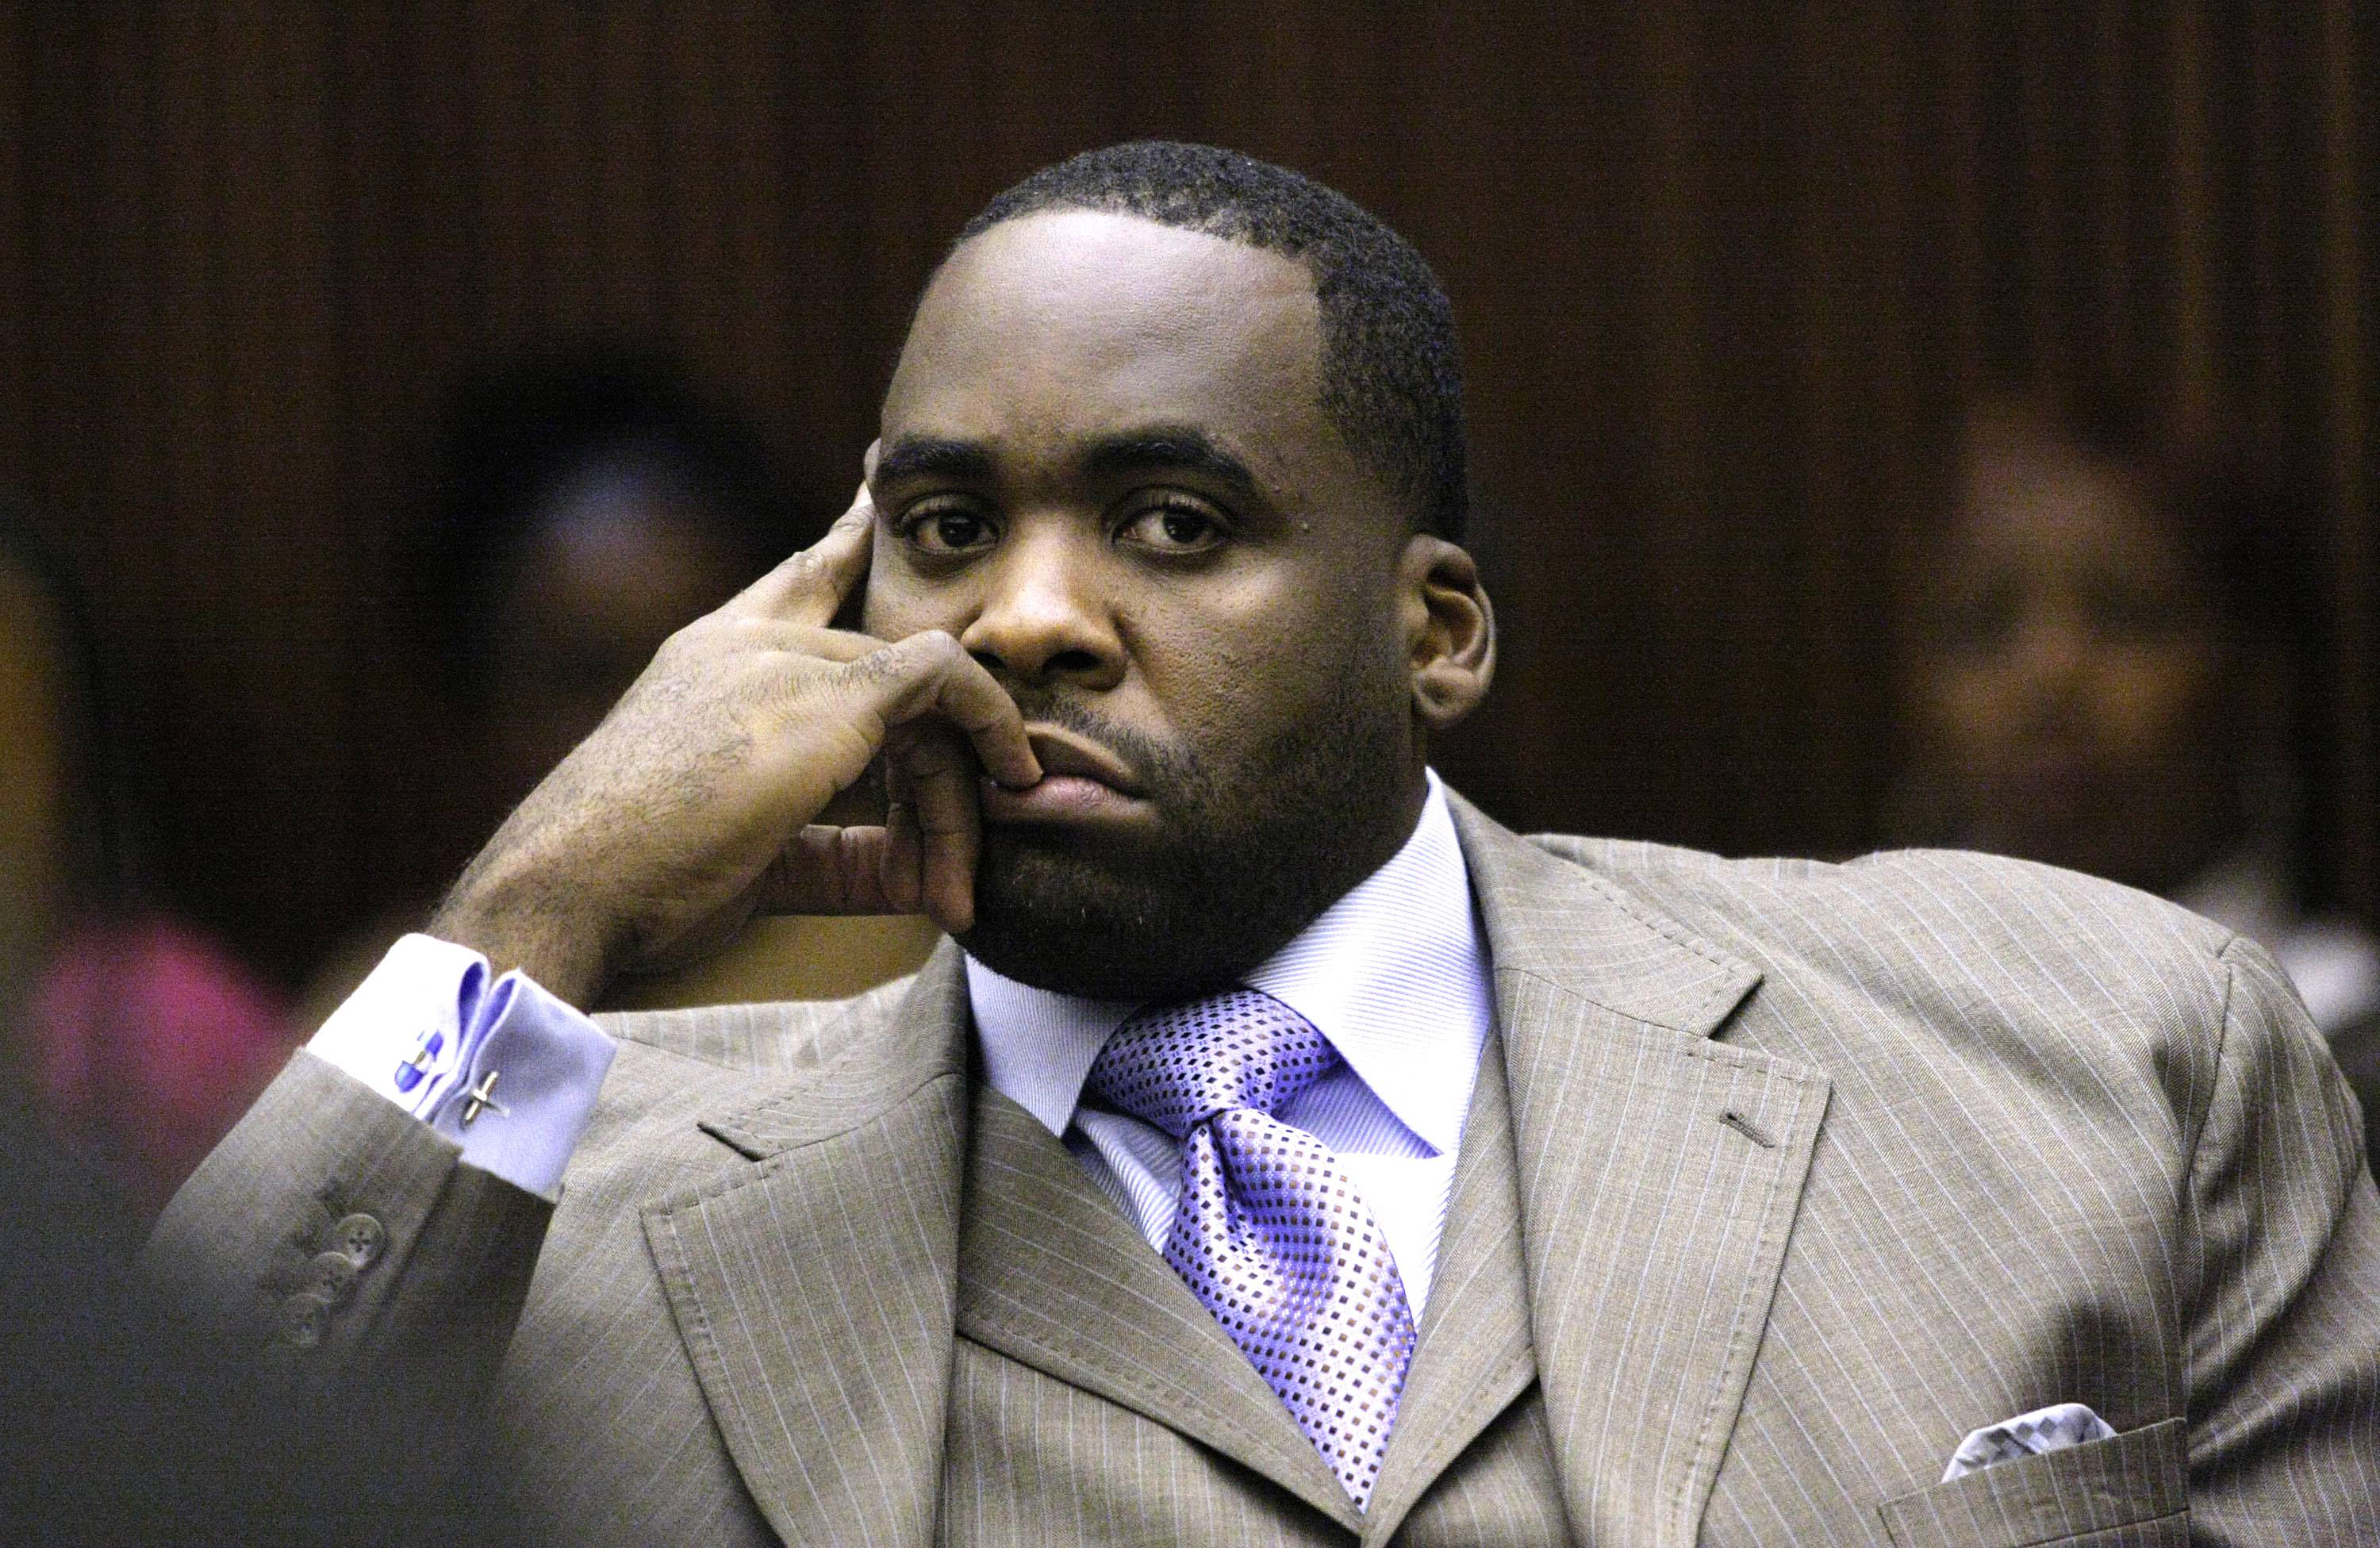 Kwame Kilpatrick - Despite having served time in prison, former Detroit mayor Kwame Kilpatrick is still feeling the ramifications of a sexting scandal that ousted him from office. Text messages don’t lie, even if a politician does, and Kilpatrick is now an ex-felon after perjuring himself about exchanges between him and an affair he conducted with a married city employee, among other charges.(Photo: Bill Pugliano/Getty Images)